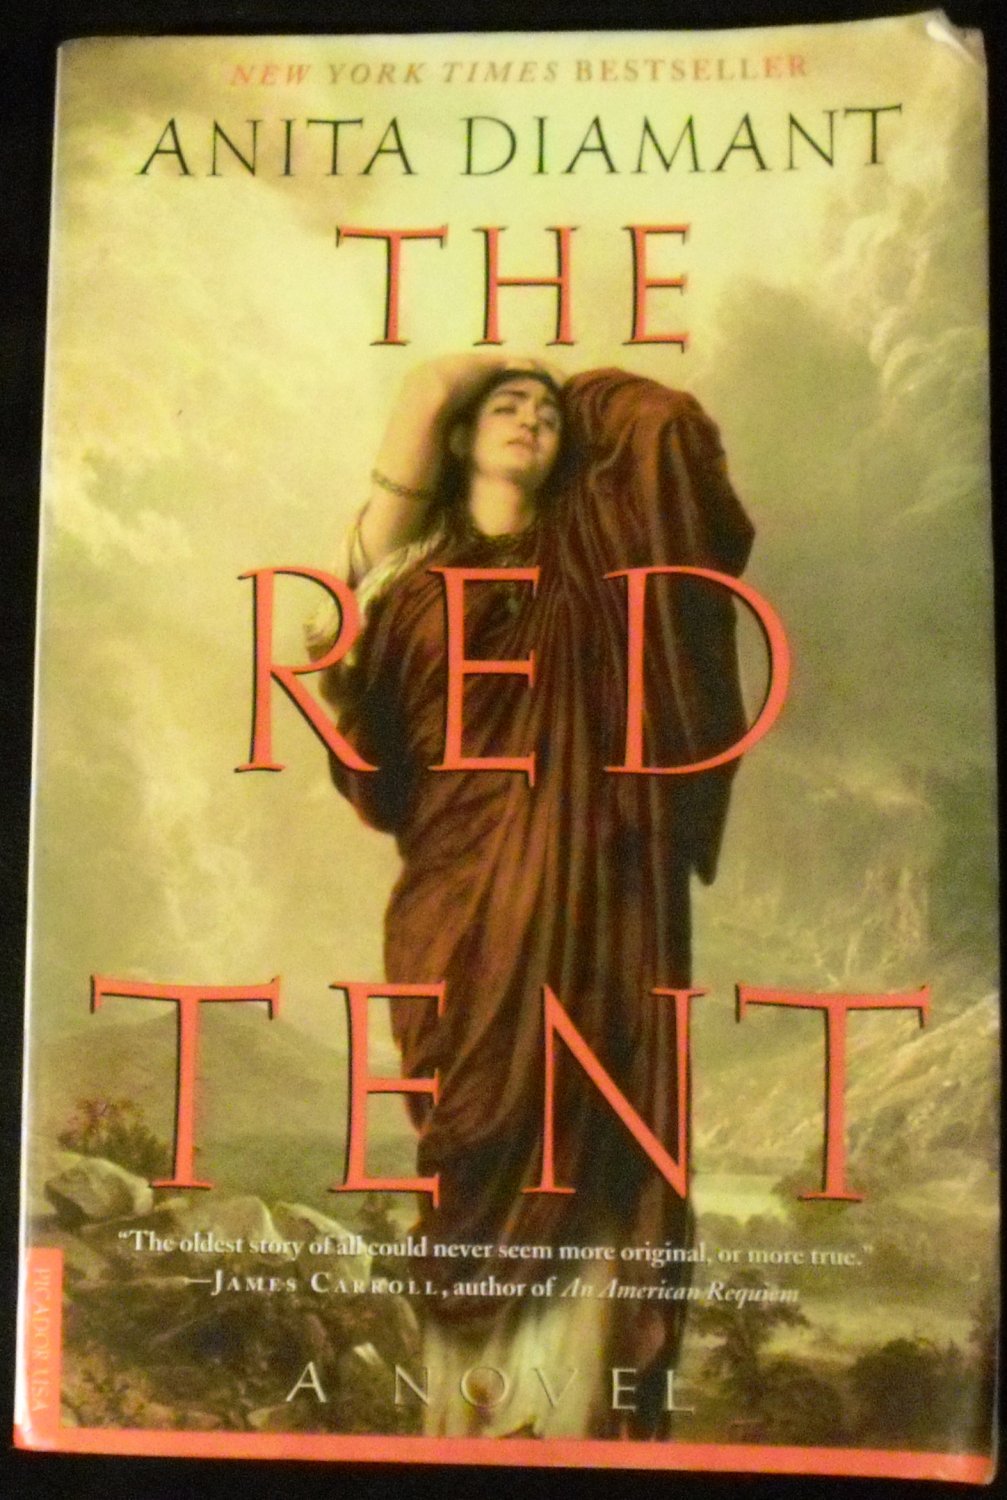 The red tent by anita diamant essay